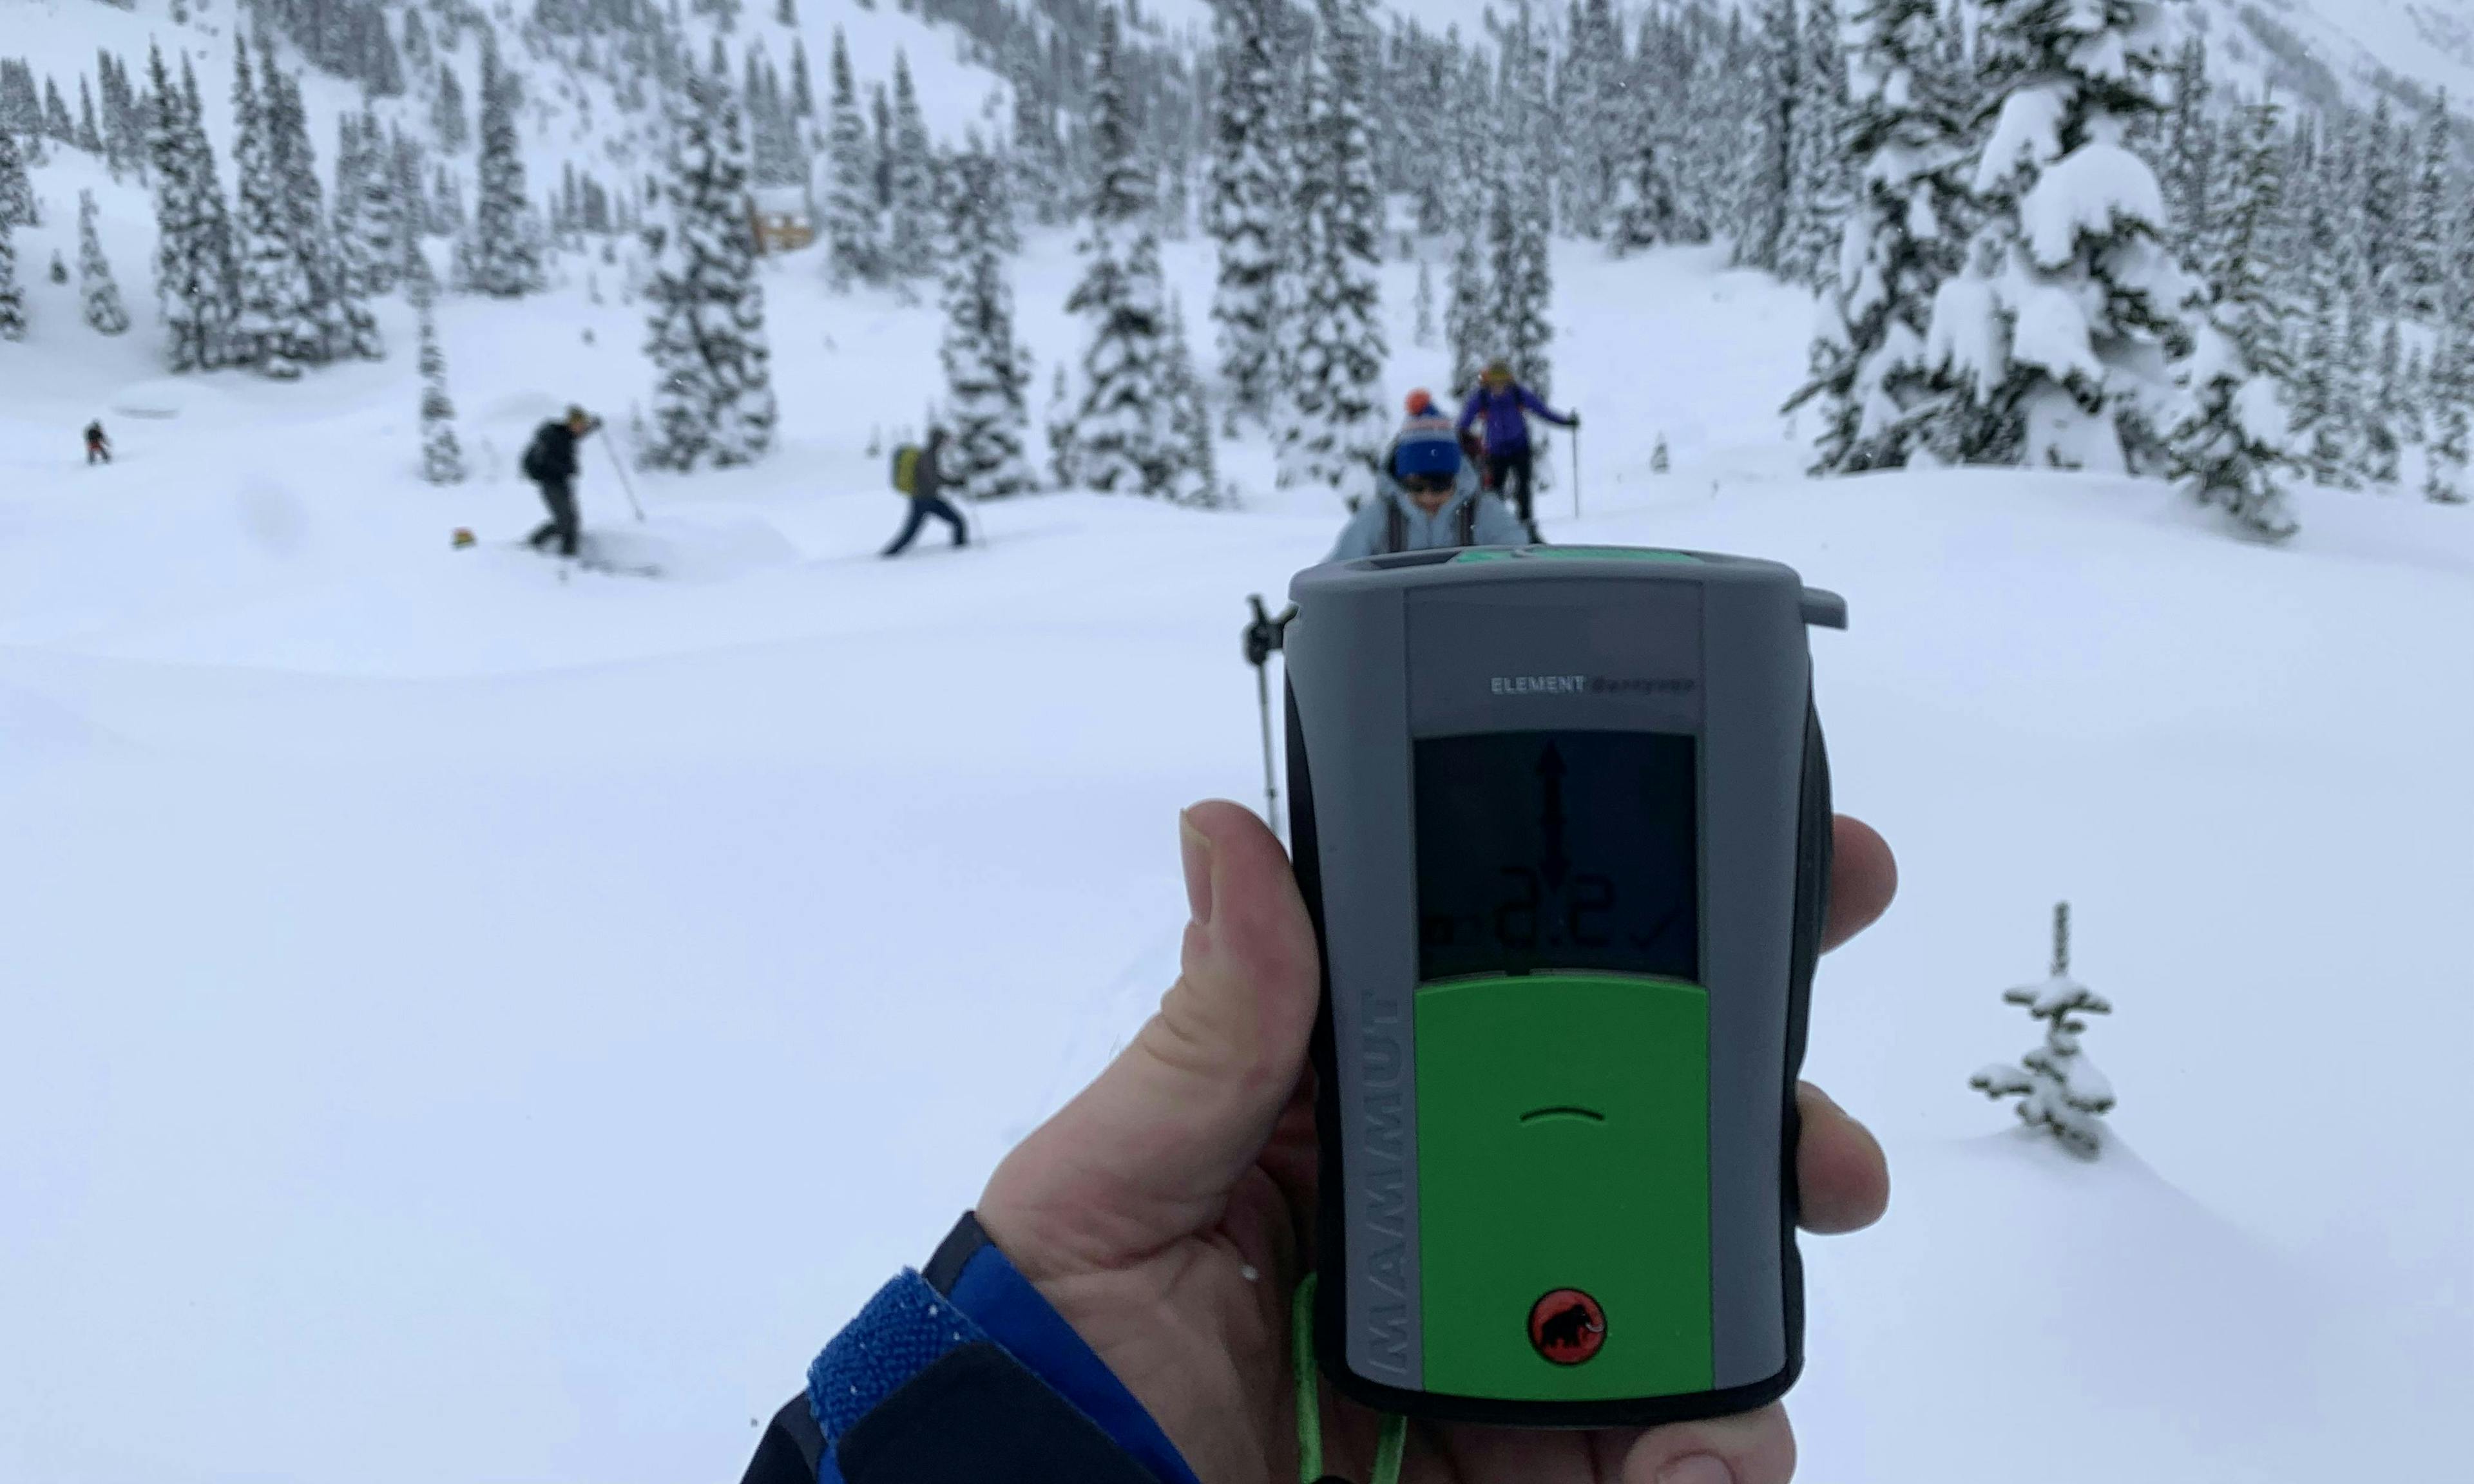 Skier holding a beacon the backcountry